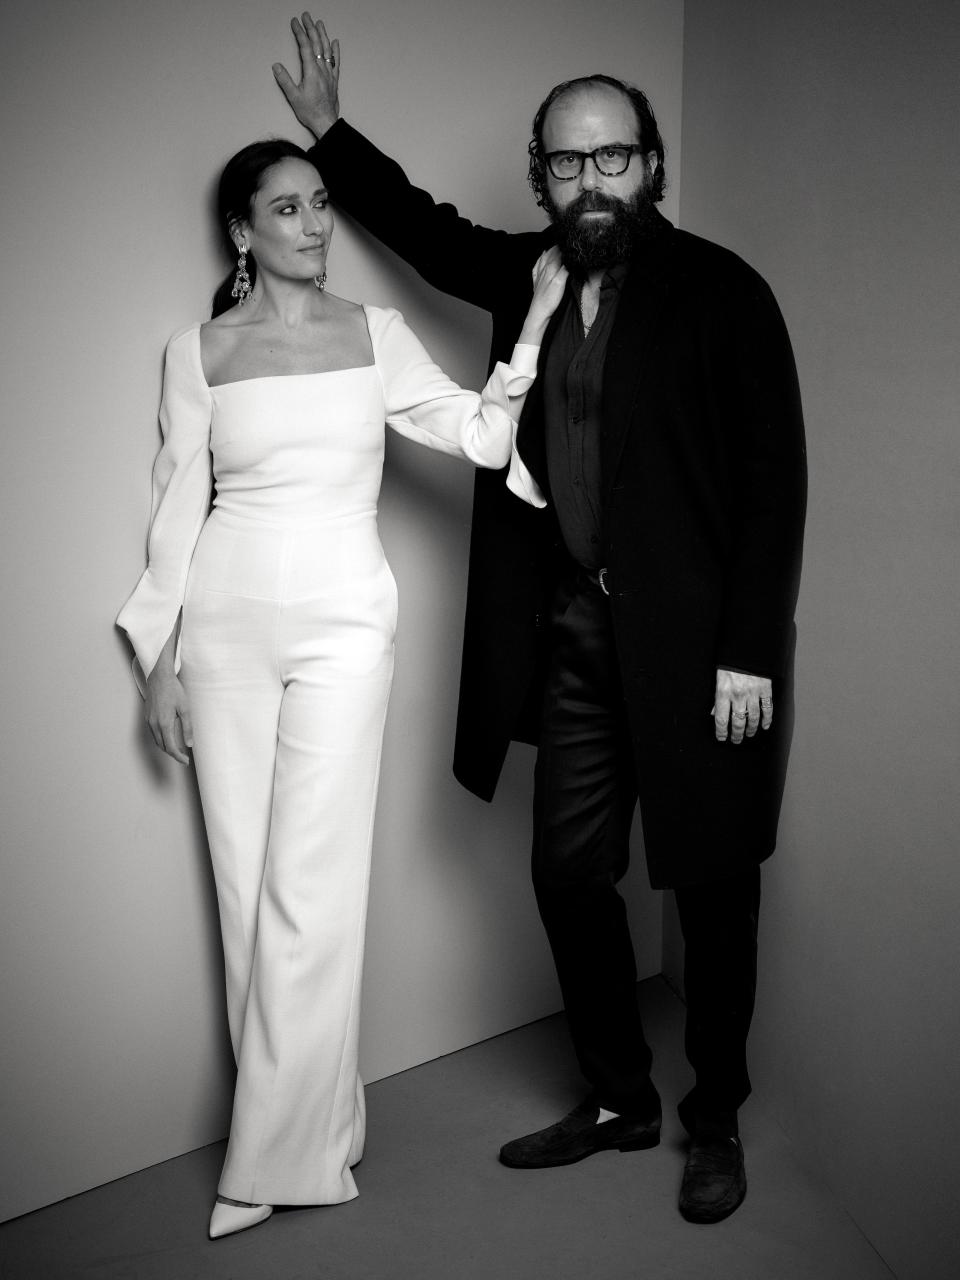 Portraits From Vanity Fair and Amazon's Pre-Golden Globes Bash